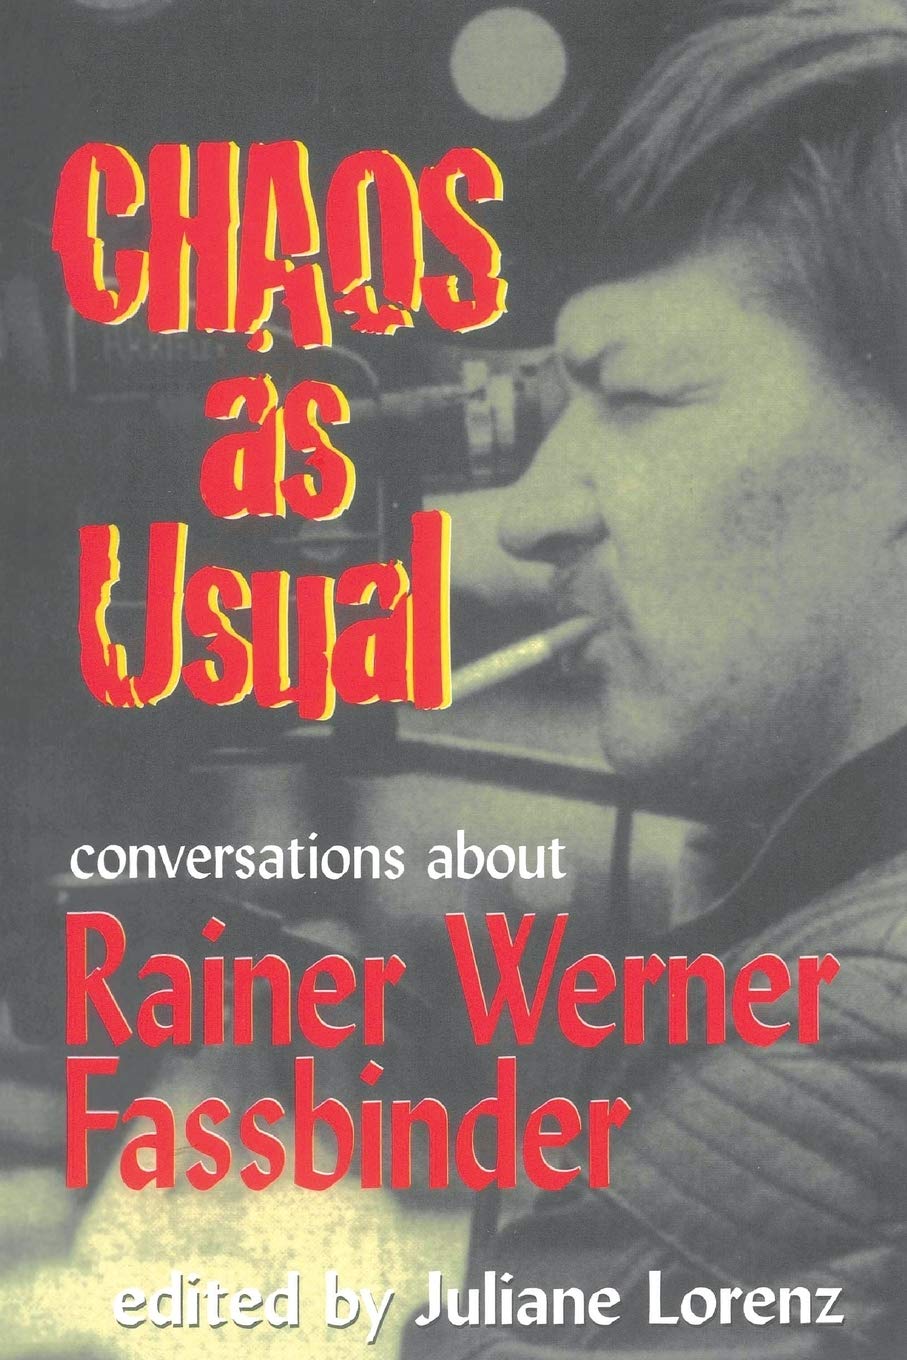 Chaos as Usual: Conversations About Rainer Werner Fassbinder by Marion Schmid